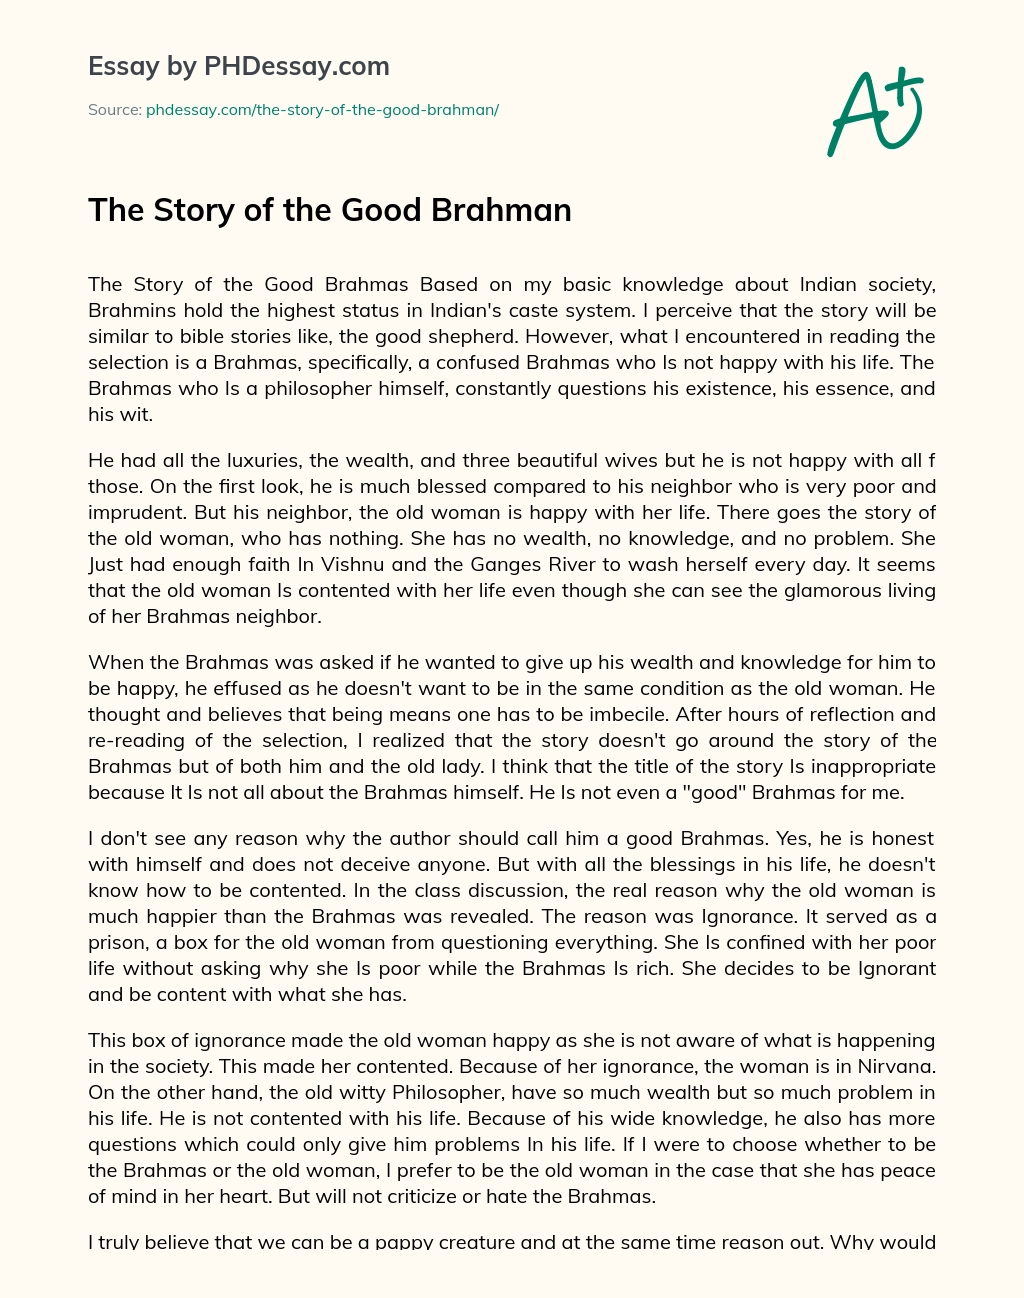 The Story of the Good Brahman essay